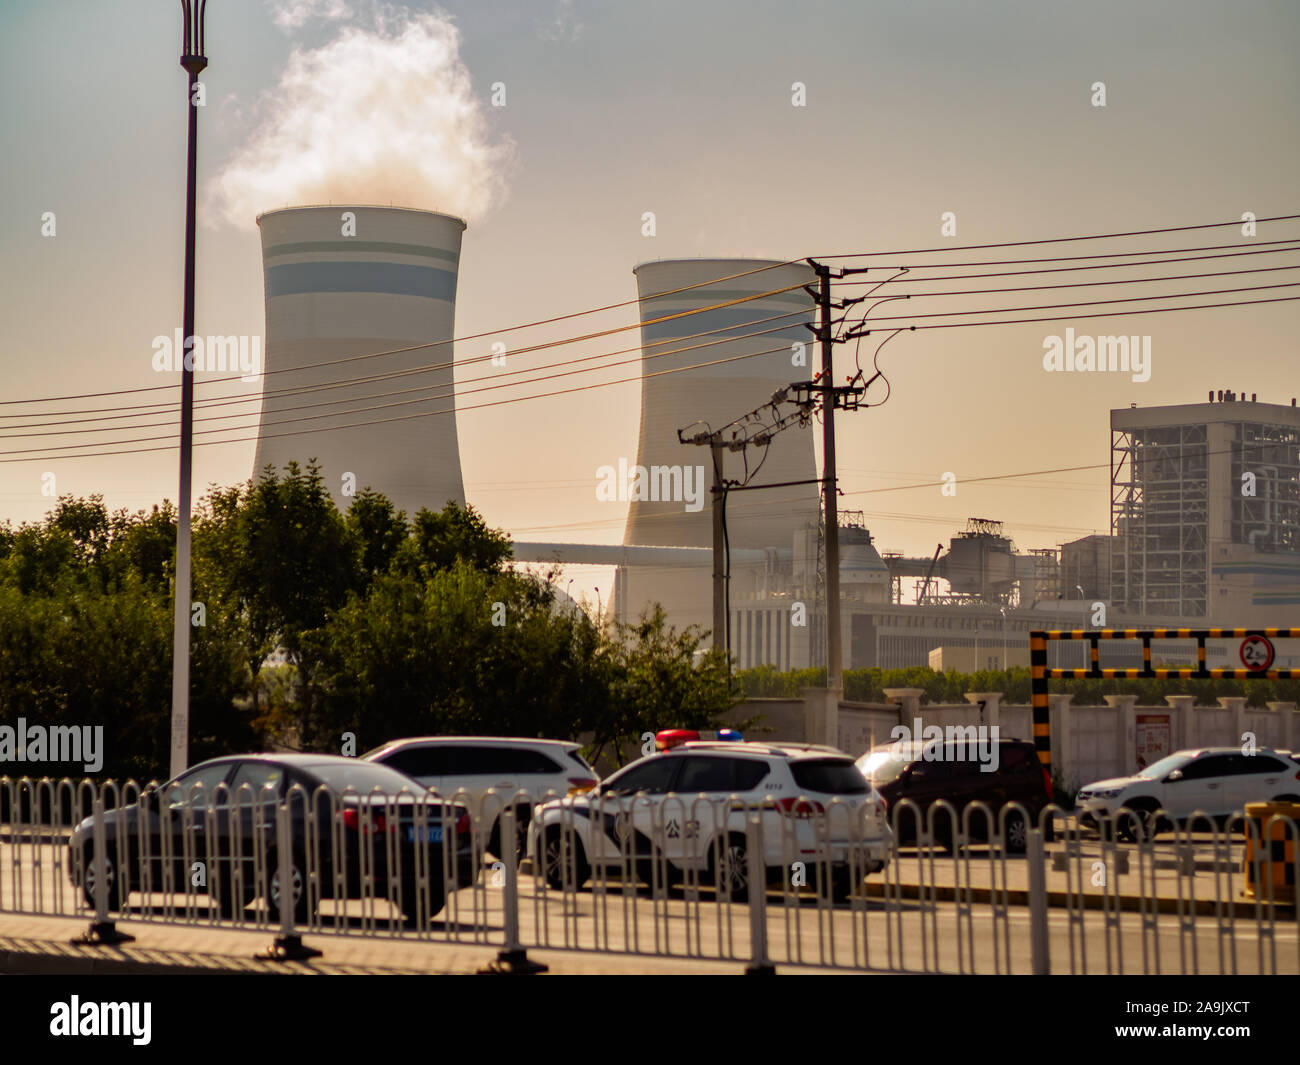 TIANJIN, CHINA - 7 OCT 19 - A  nuclear power plant next to a motorway emits a plume of white smoke from its smokestack. Stock Photo